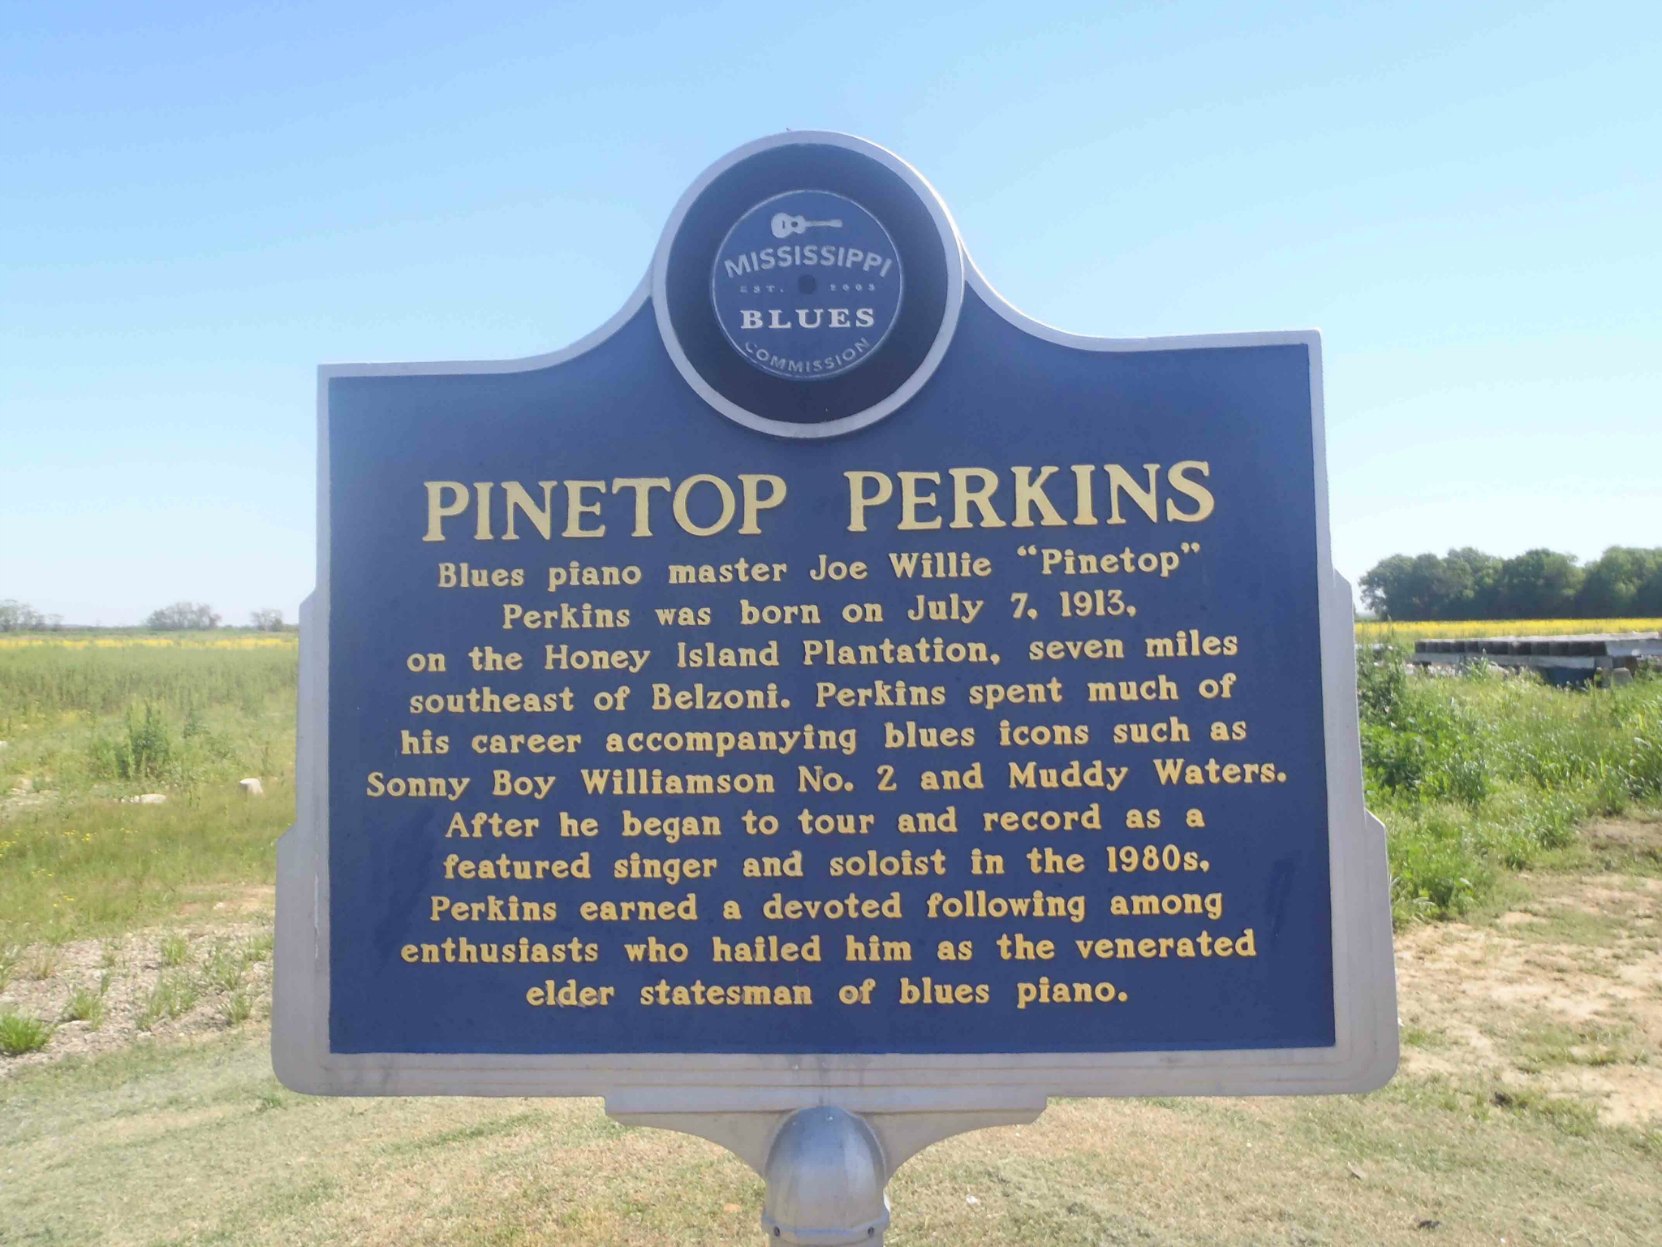 Mississippi Blues Trail marker commemorating Pinetop Perkins, on Highway 49W, north west of Belzoni, Mississippi